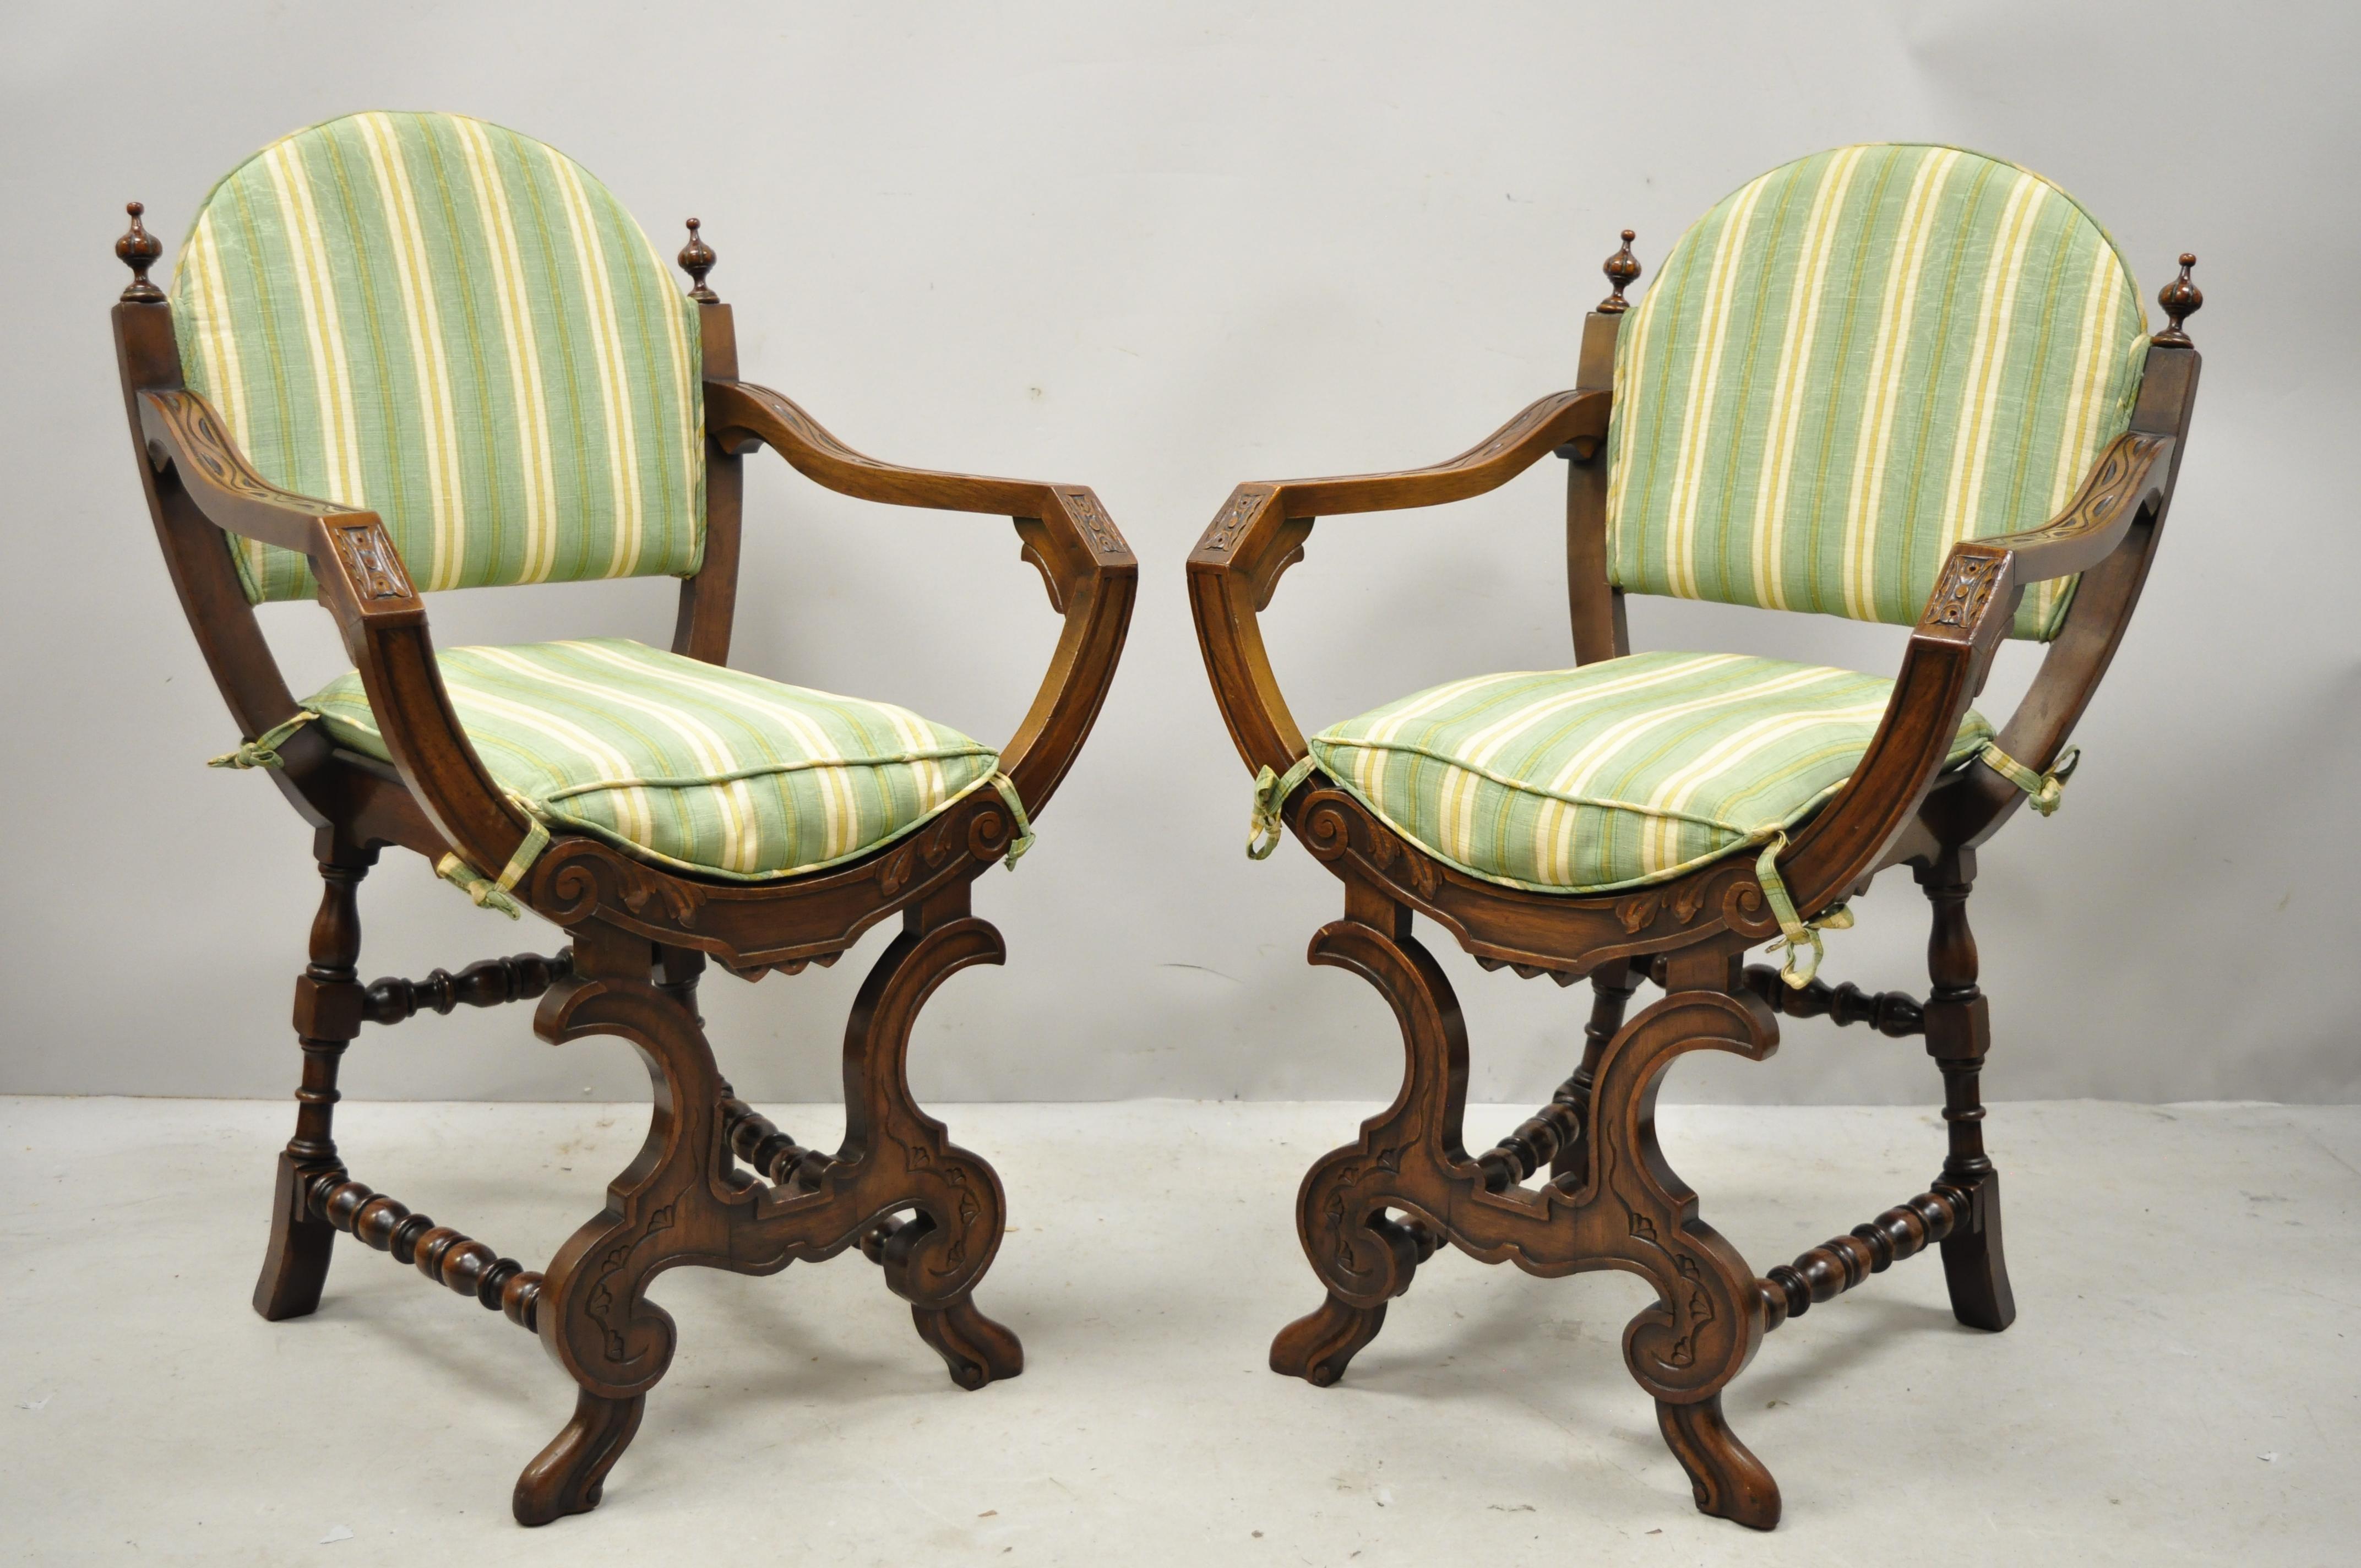 Pair of antique Italian Renaissance carved walnut Savonarola Throne armchairs. Item features turn carved stretcher supports, loose seat cushion, solid wood construction, nicely carved details, very nice antique item, circa early 1900s. Measurements: